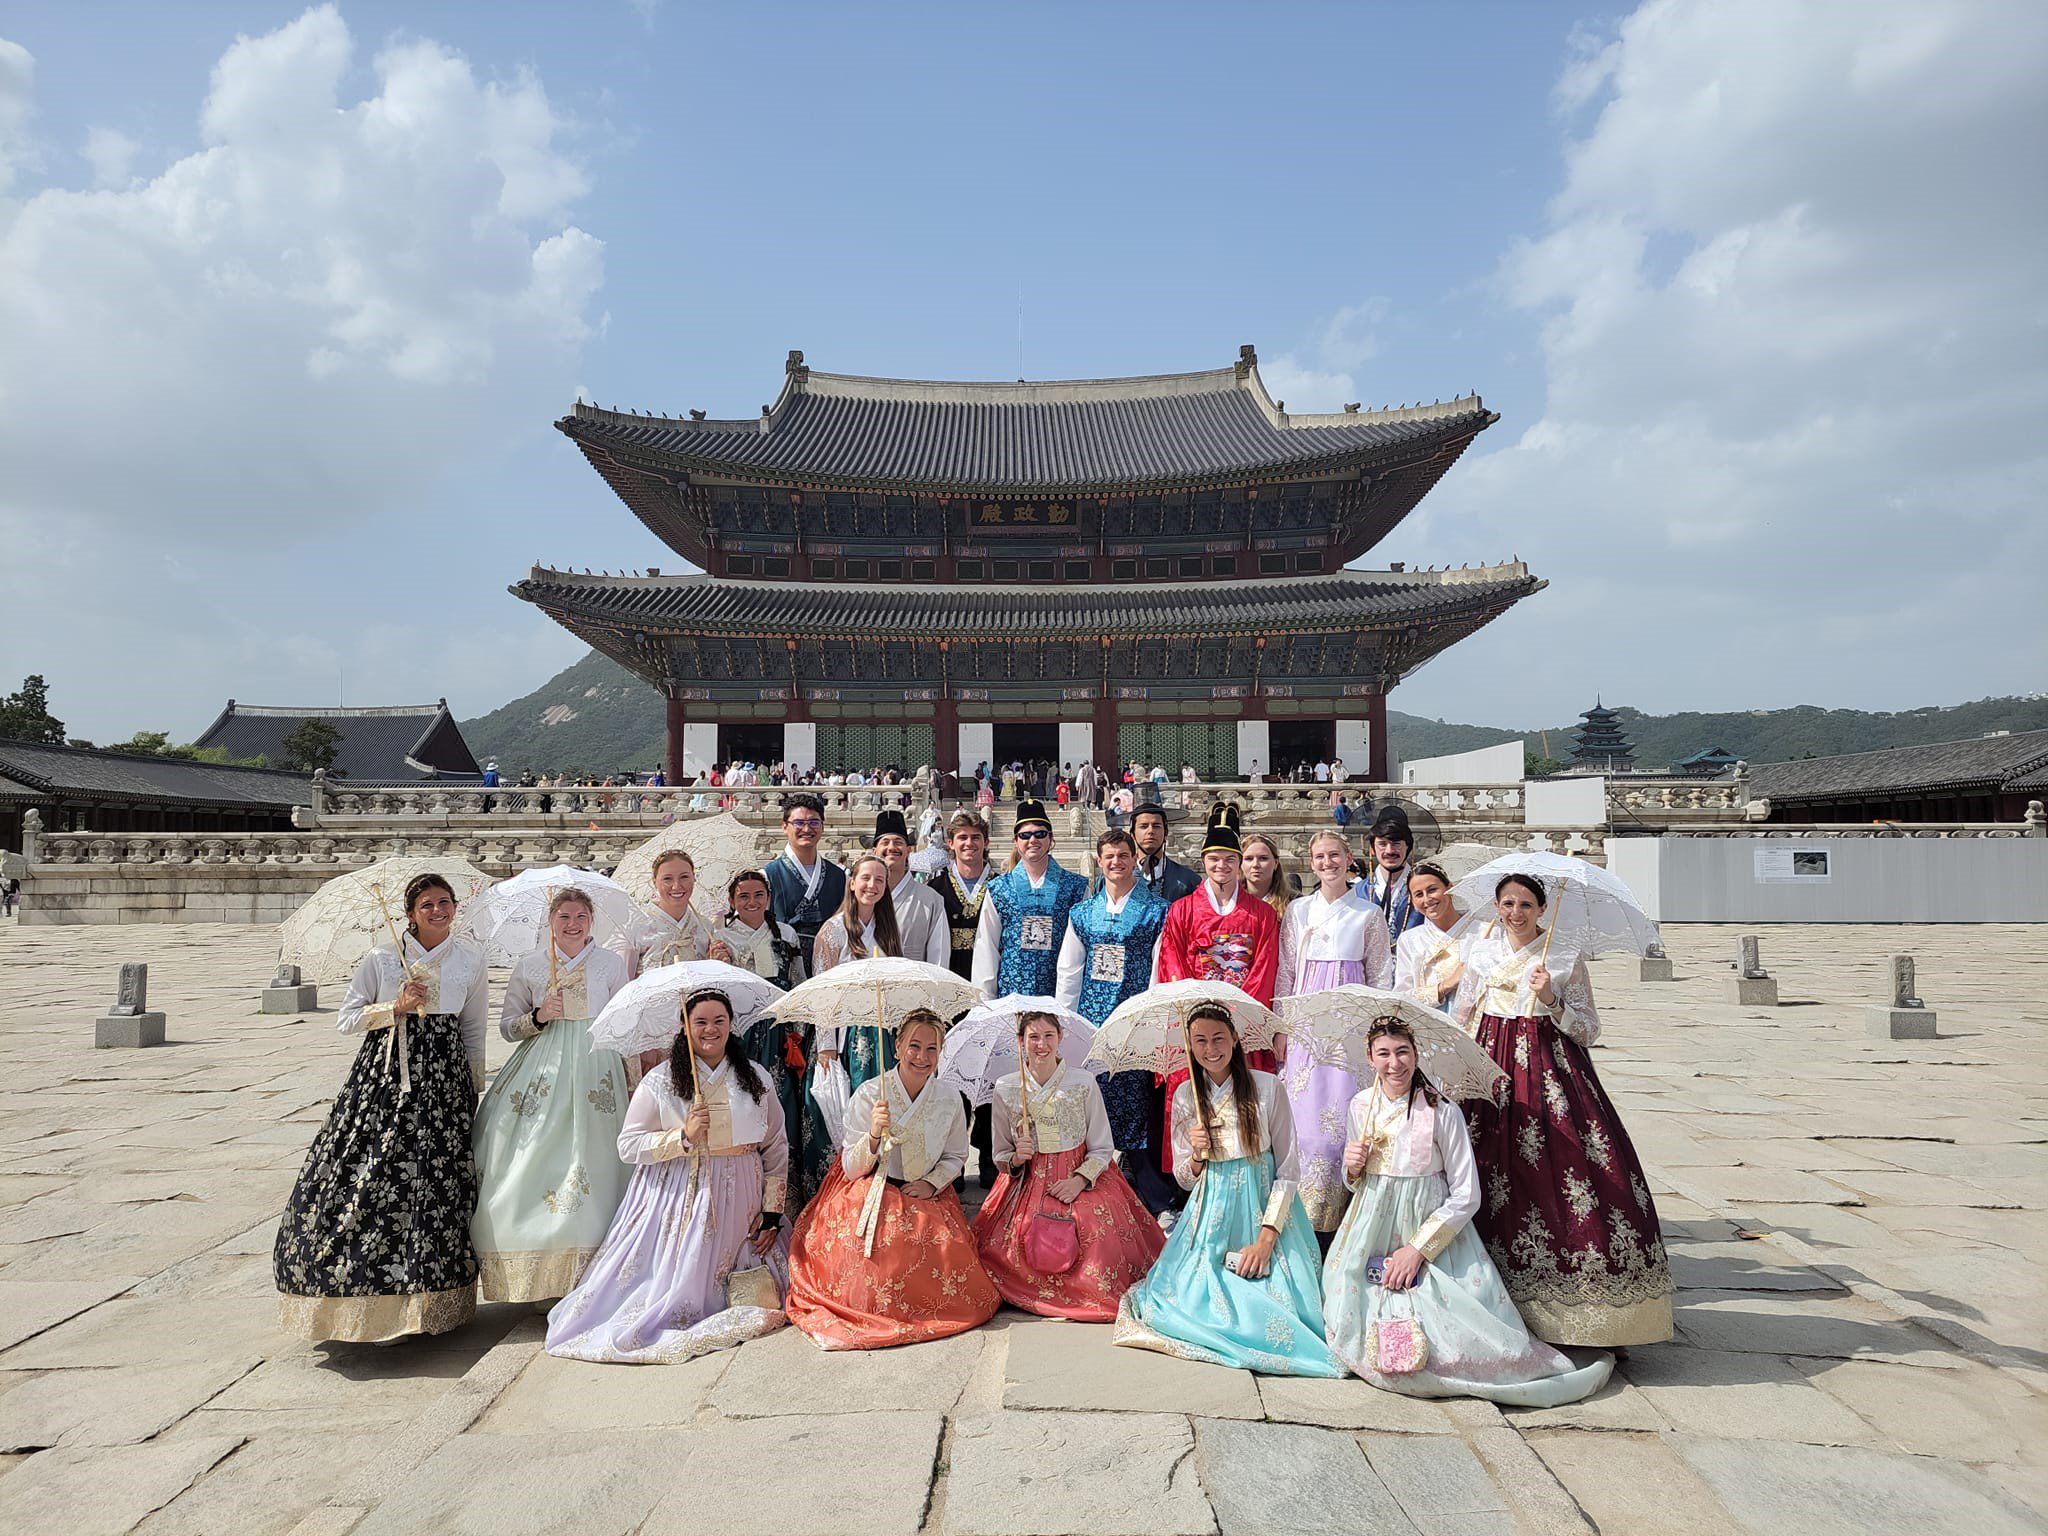 Study abroad students in traditional Korean dress